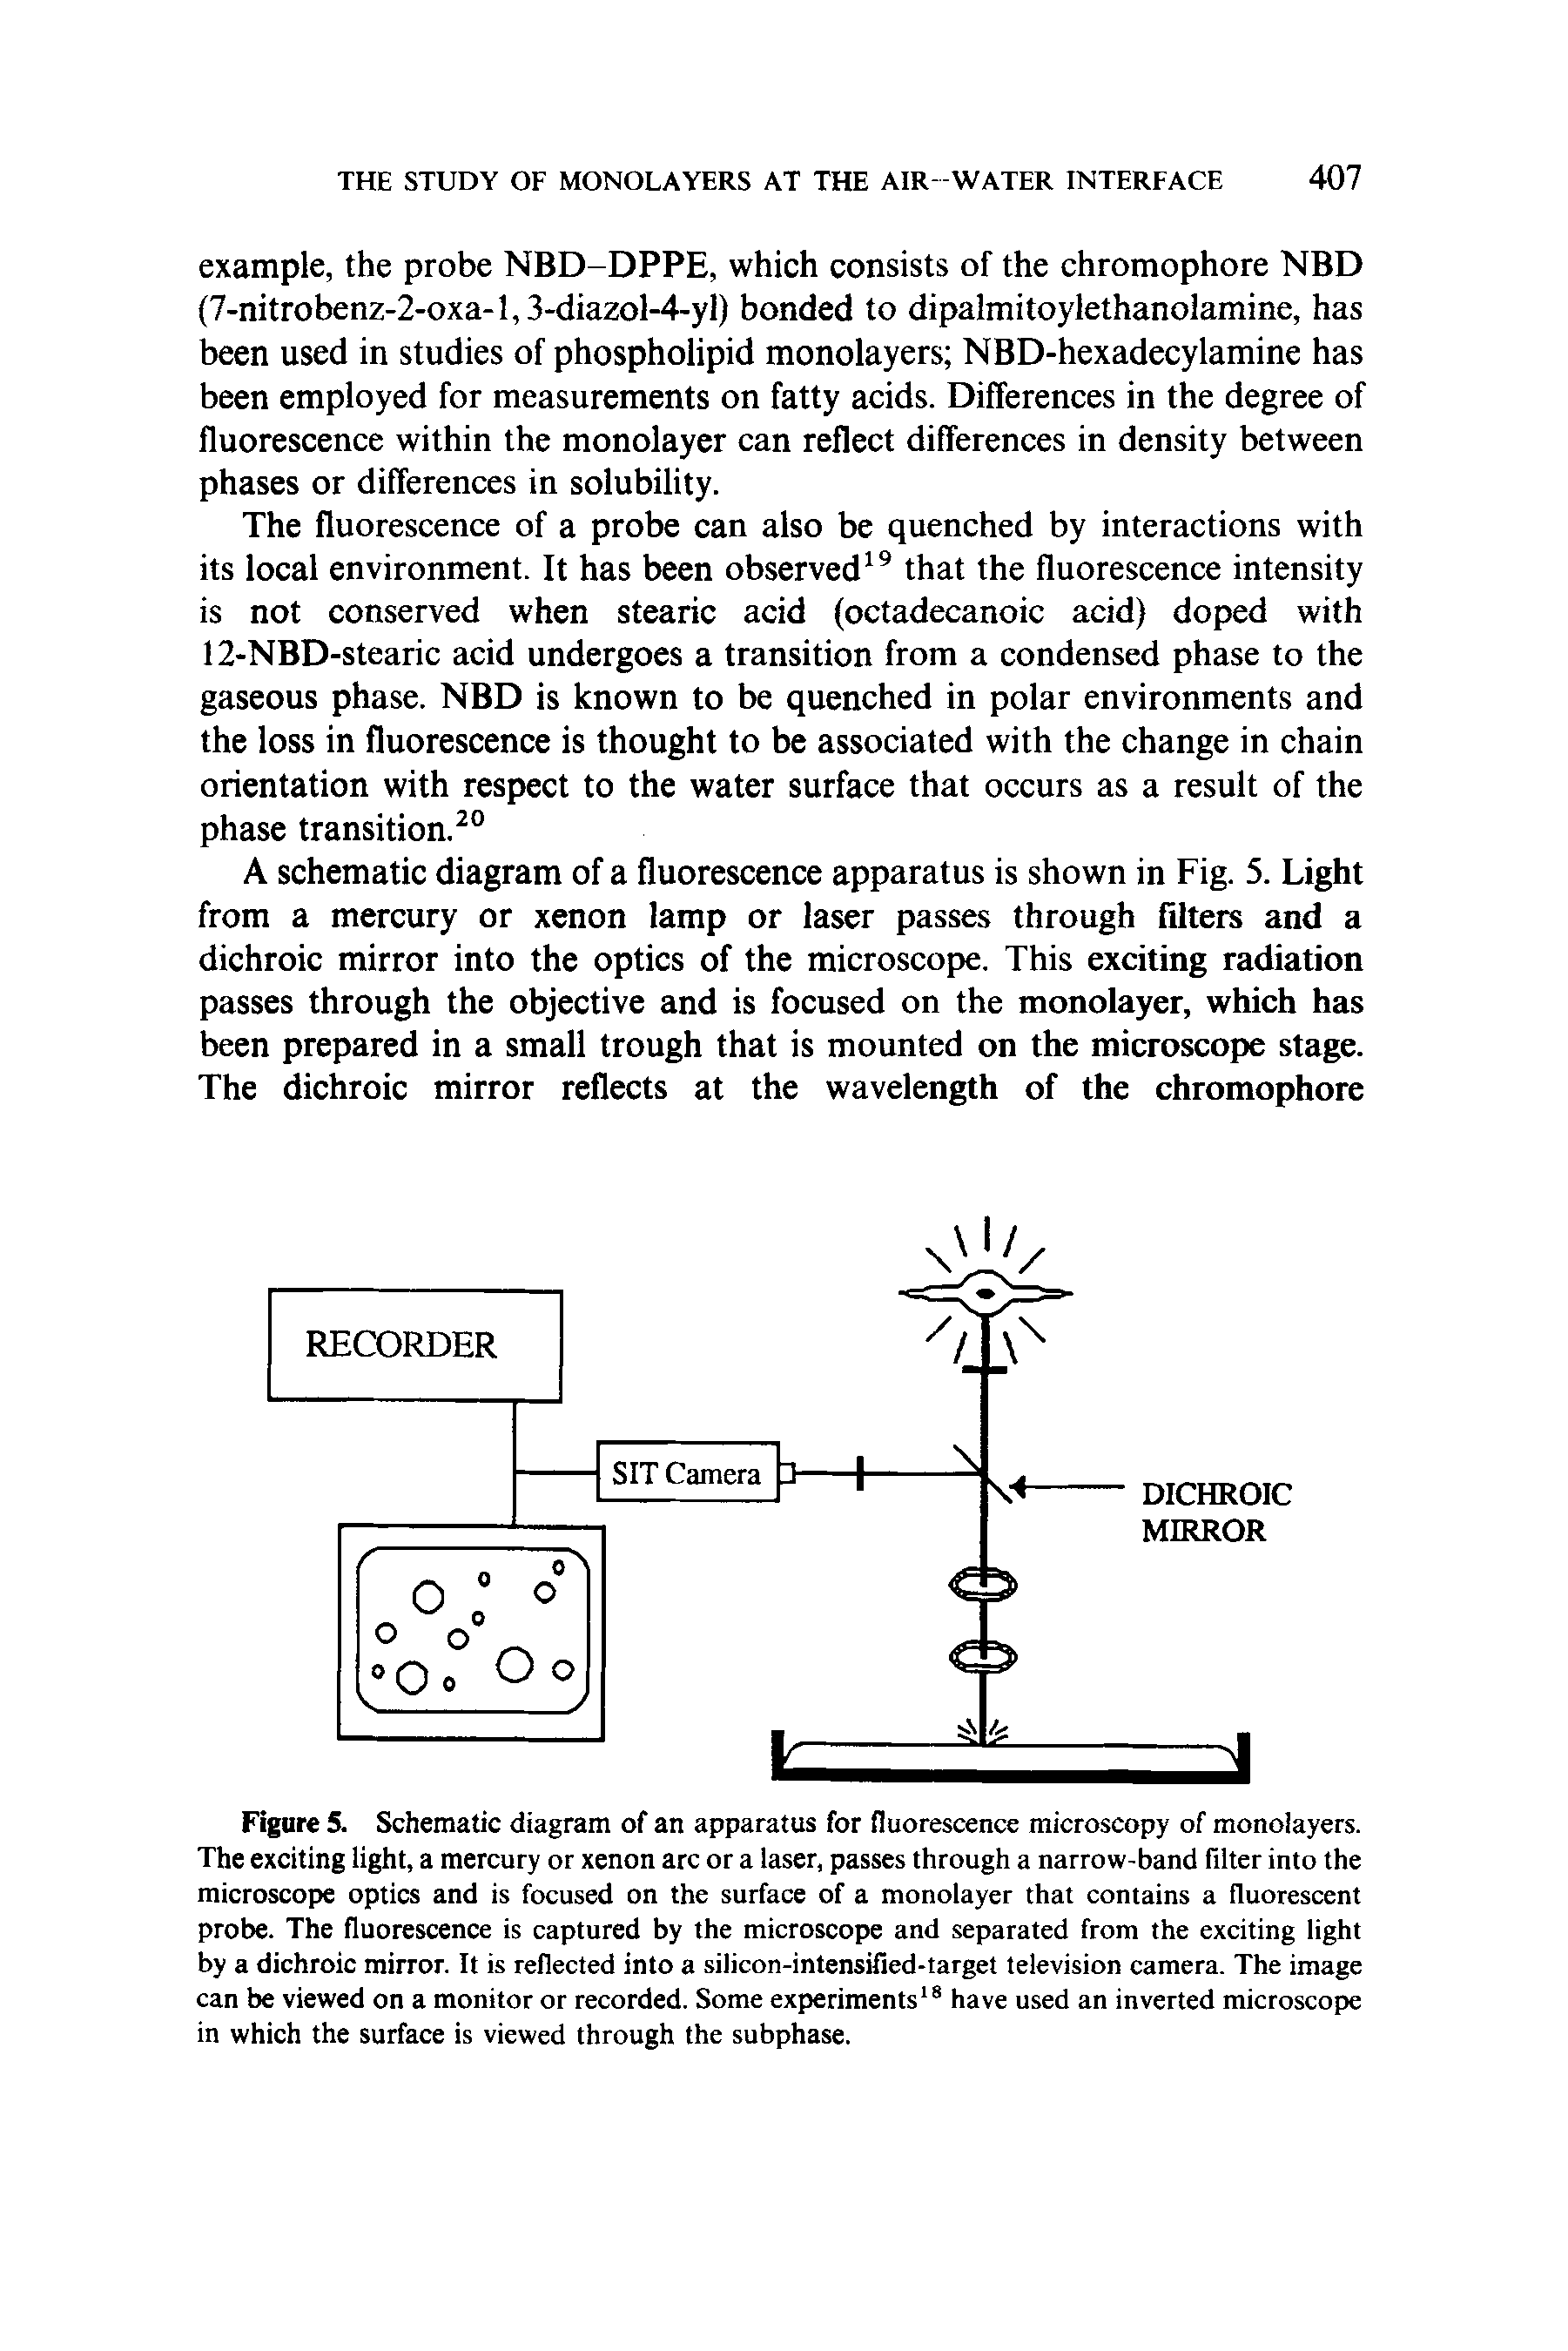 Figure 5. Schematic diagram of an apparatus for fluorescence microscopy of monolayers. The exciting light, a mercury or xenon arc or a laser, passes through a narrow-band filter into the microscope optics and is focused on the surface of a monolayer that contains a fluorescent probe. The fluorescence is captured by the microscope and separated from the exciting light by a dichroic mirror. It is reflected into a silicon-intensified-target television camera. The image can be viewed on a monitor or recorded. Some experiments have used an inverted microscope in which the surface is viewed through the subphase.